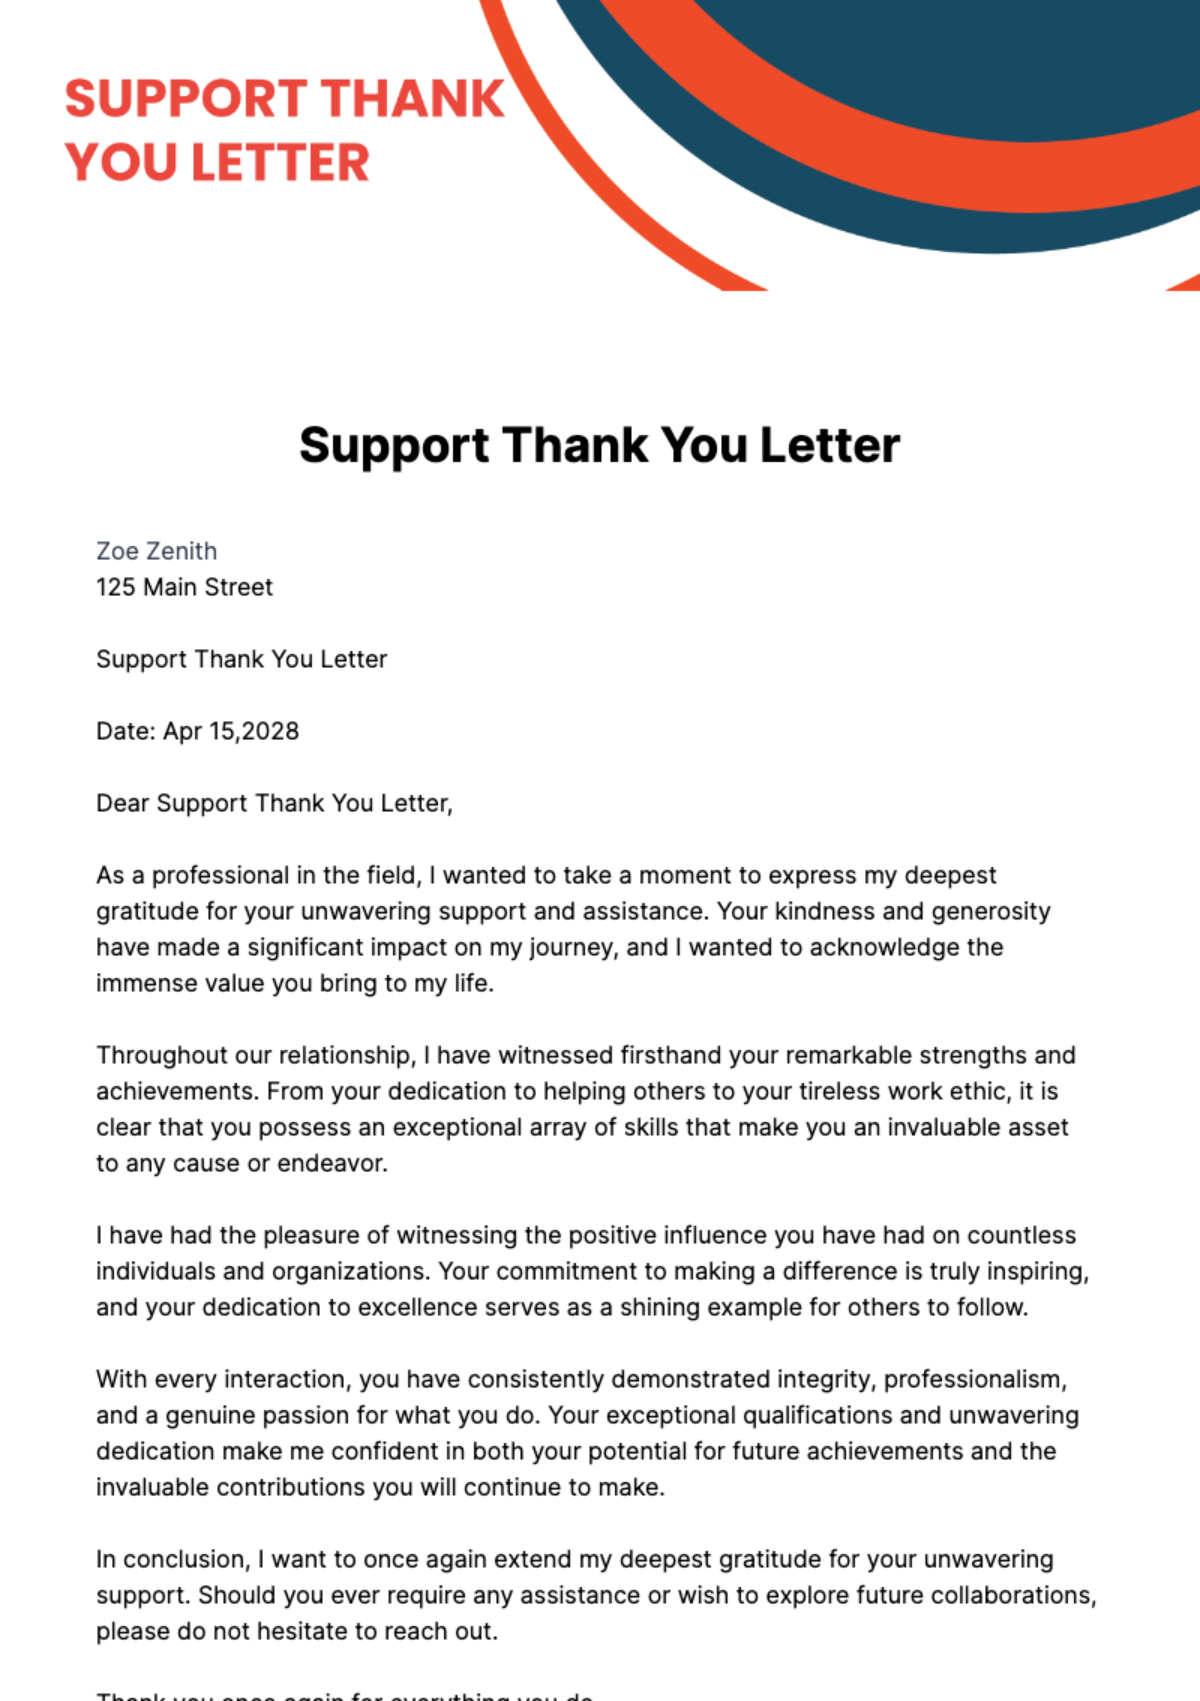 Free Support Thank You Letter Template